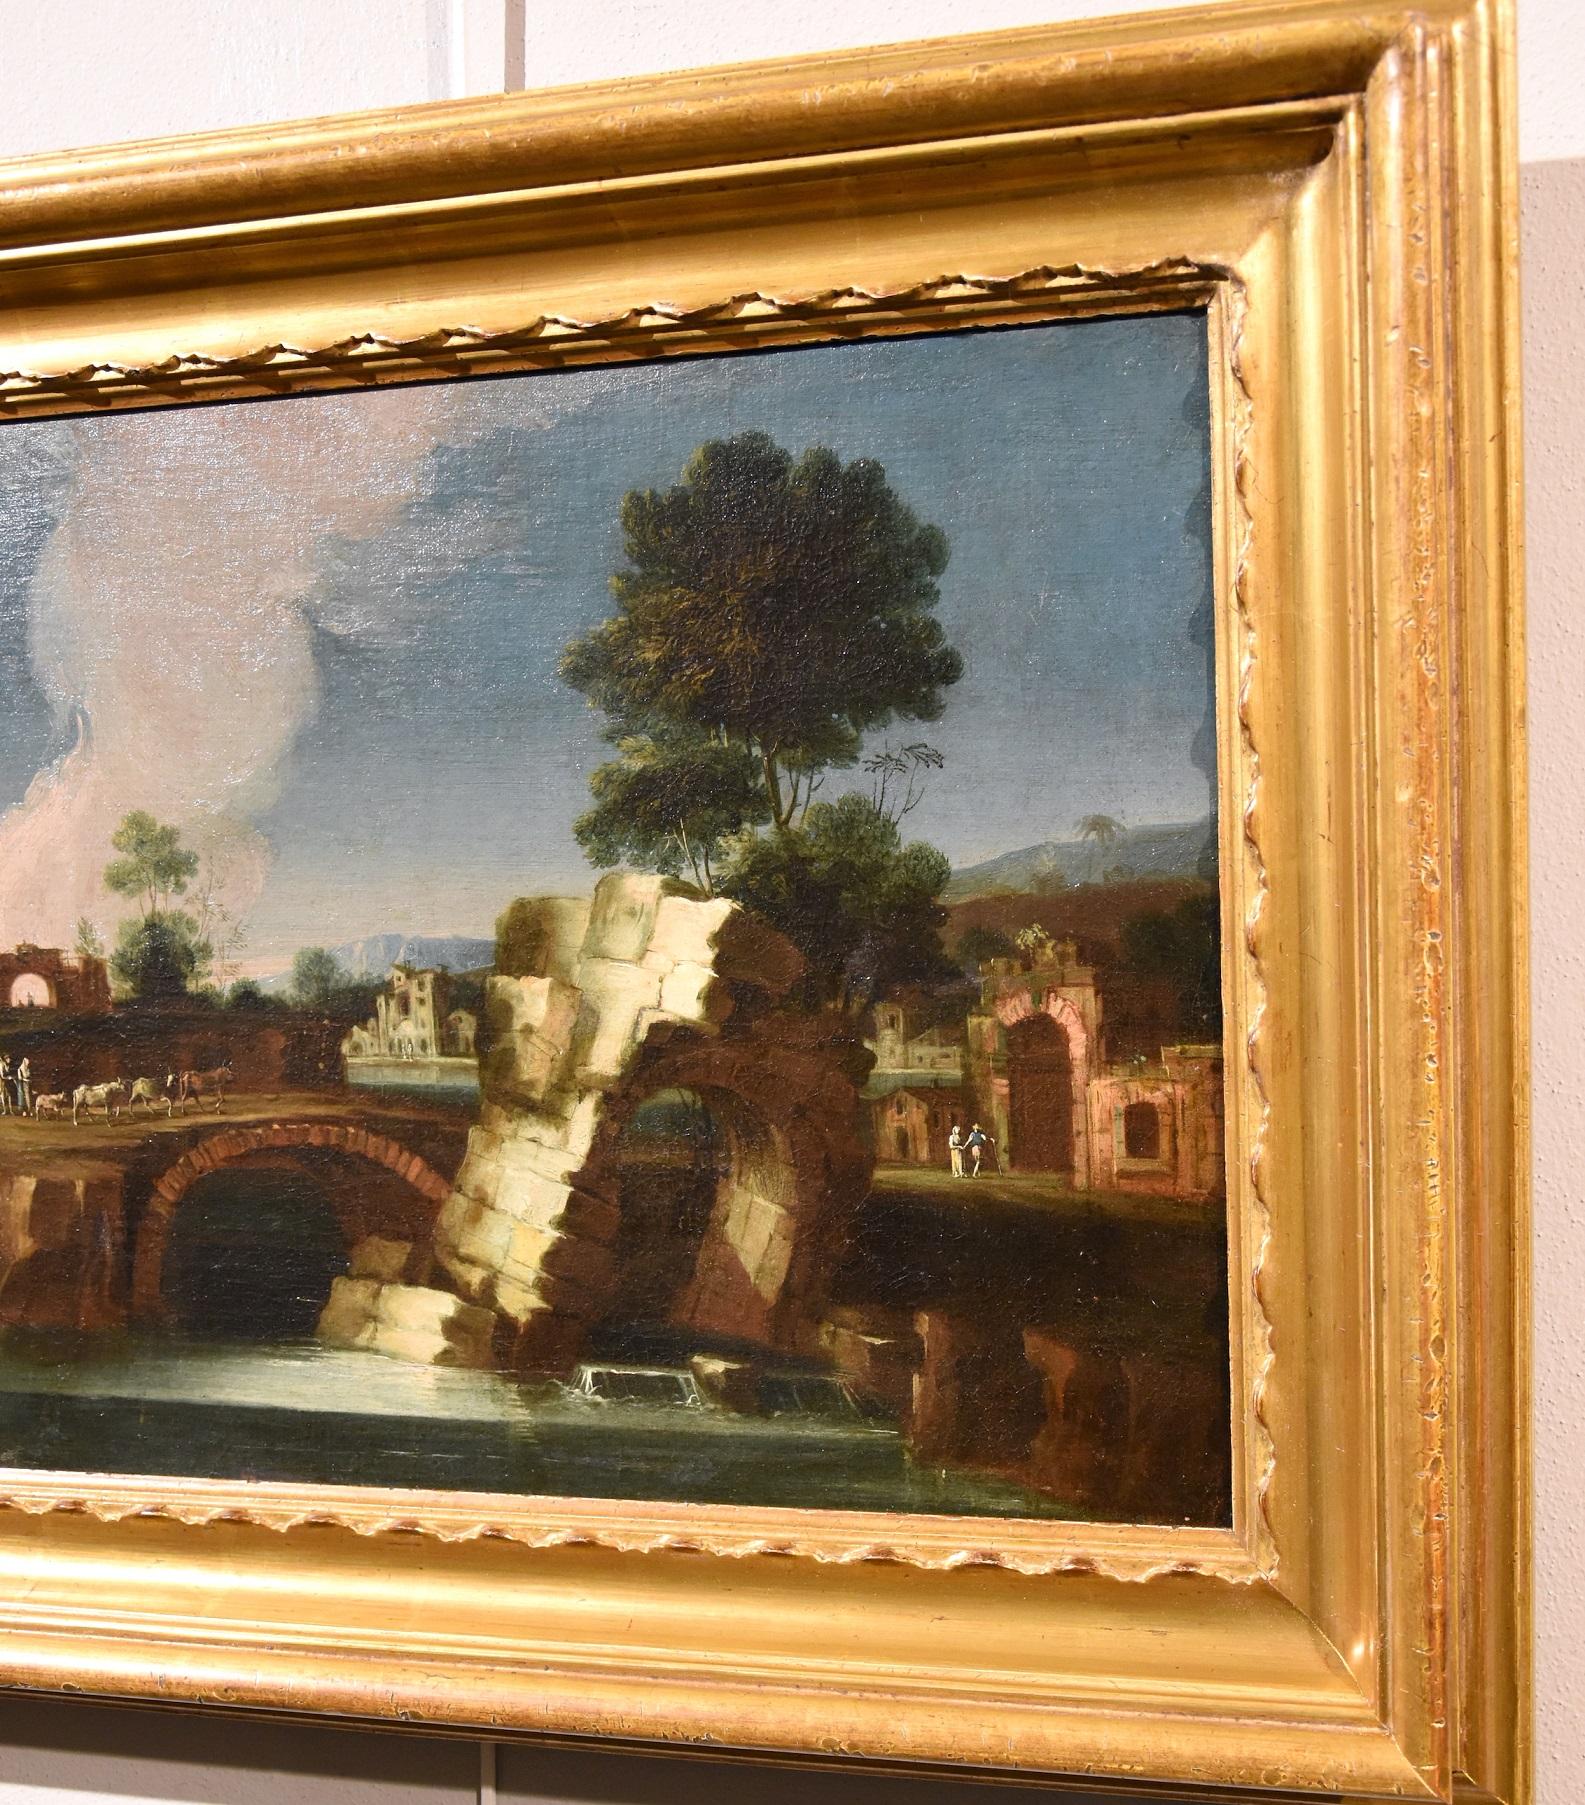 Landscape Paint Oil on canvas 18th Century Old master Roma Italy River Water Art - Brown Landscape Painting by Paolo Anesi (Rome 1697 - 1773)